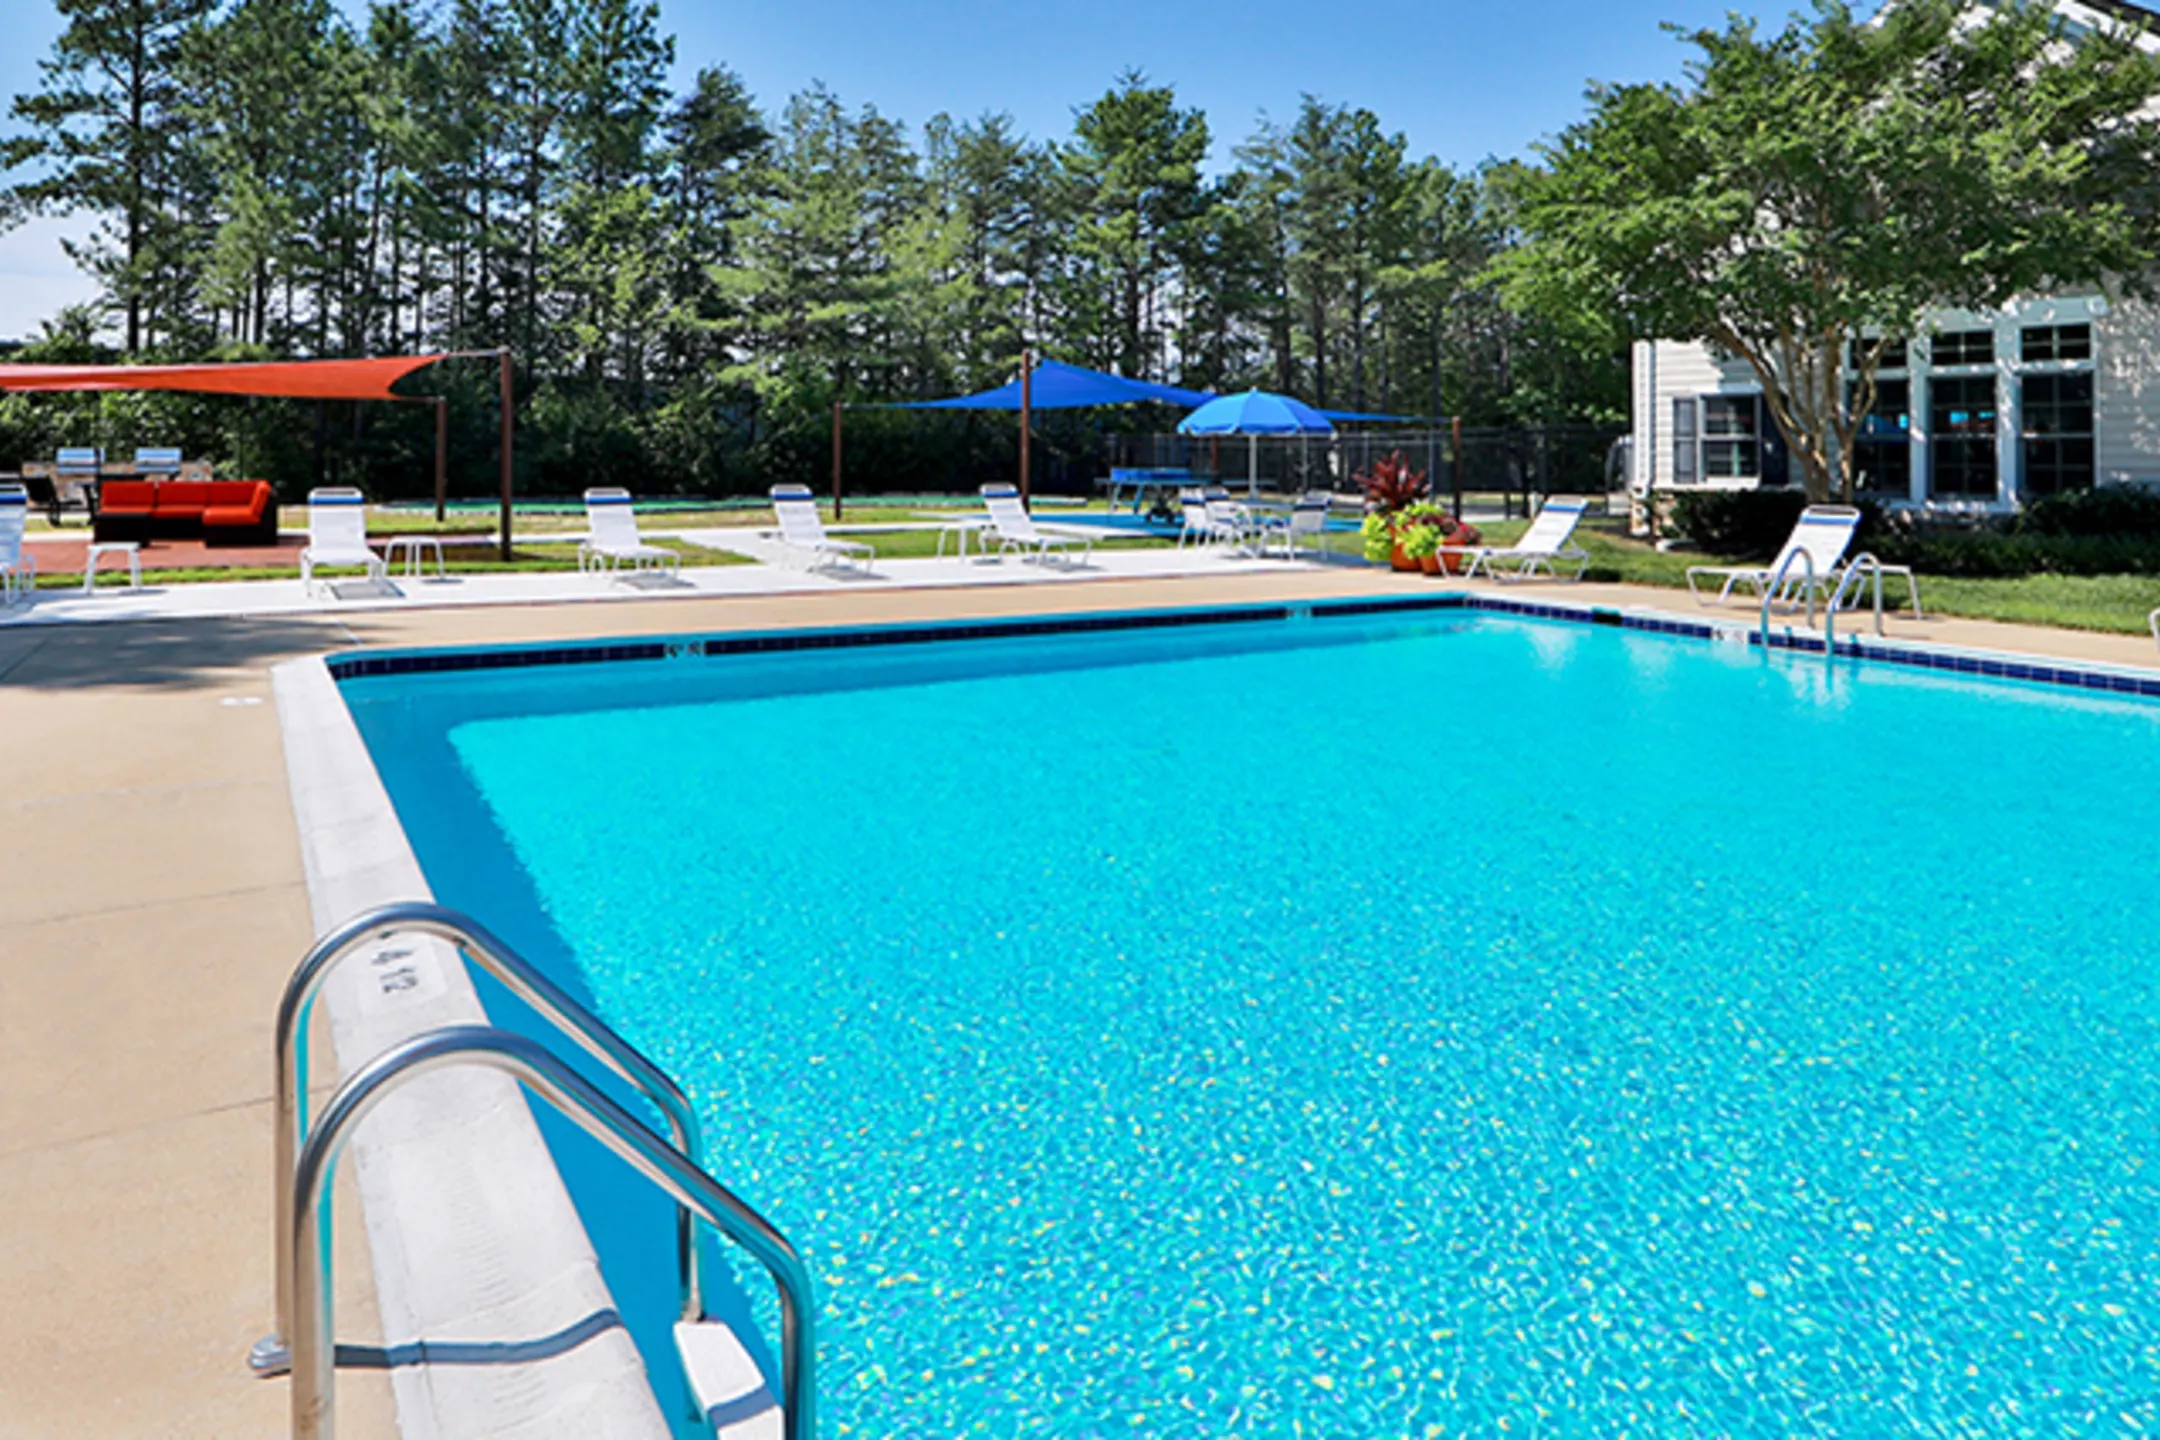 Pool - St. Mary's Landing Apartments and Townhomes - Lexington Park, MD